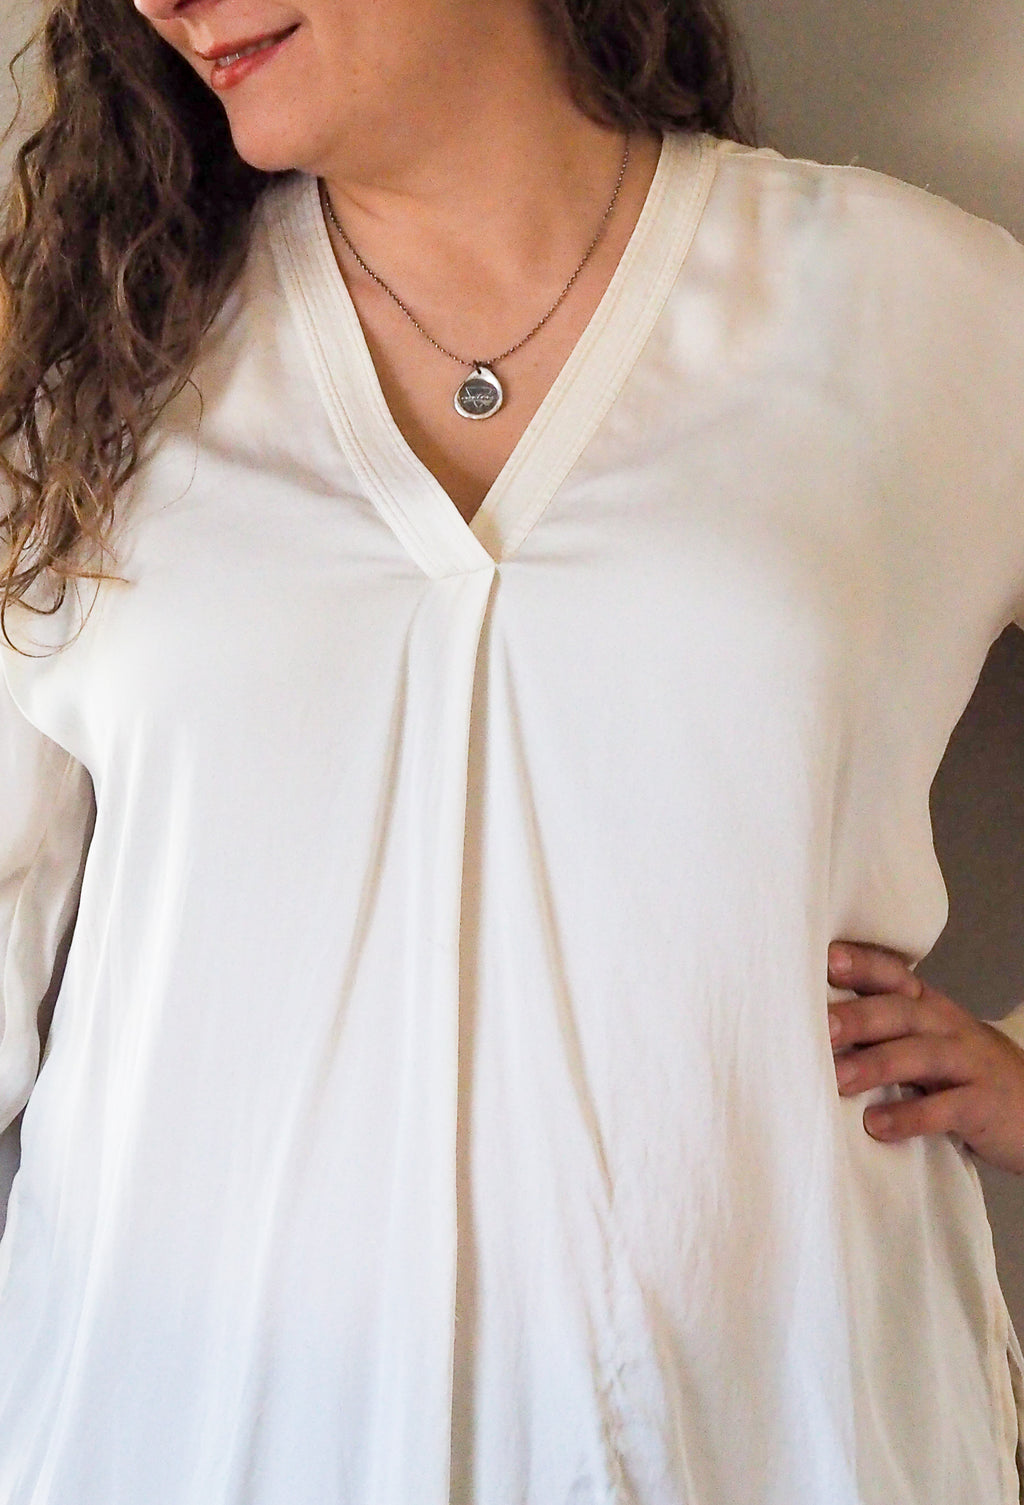 silver water sign necklace on woman in white silk top